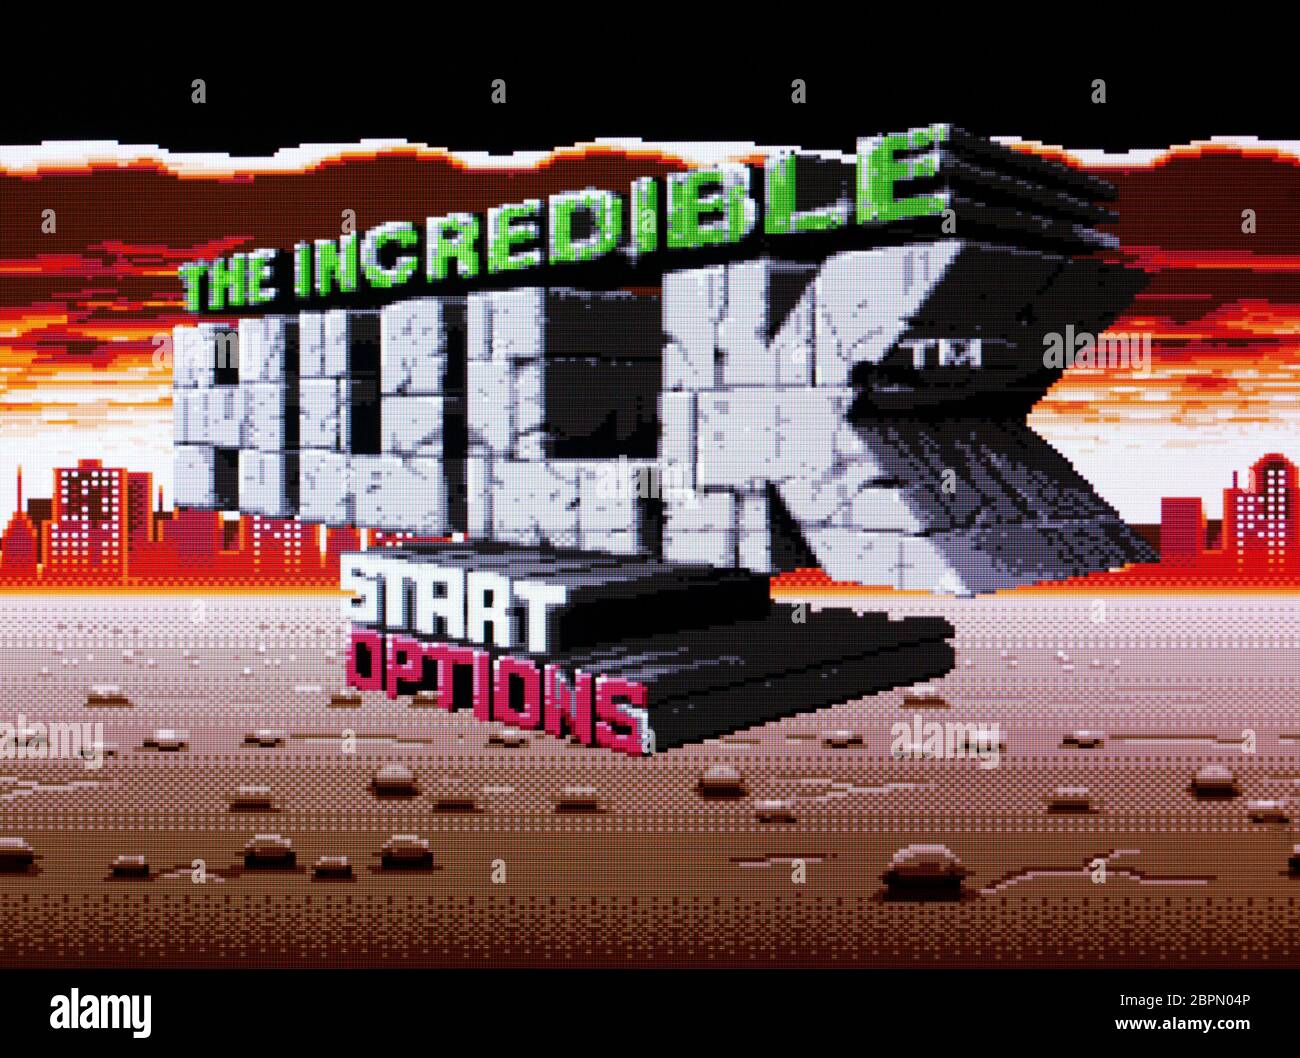 The Incredible Hulk - SNES Super Nintendo - Editorial use only Stock Photo  - Alamy